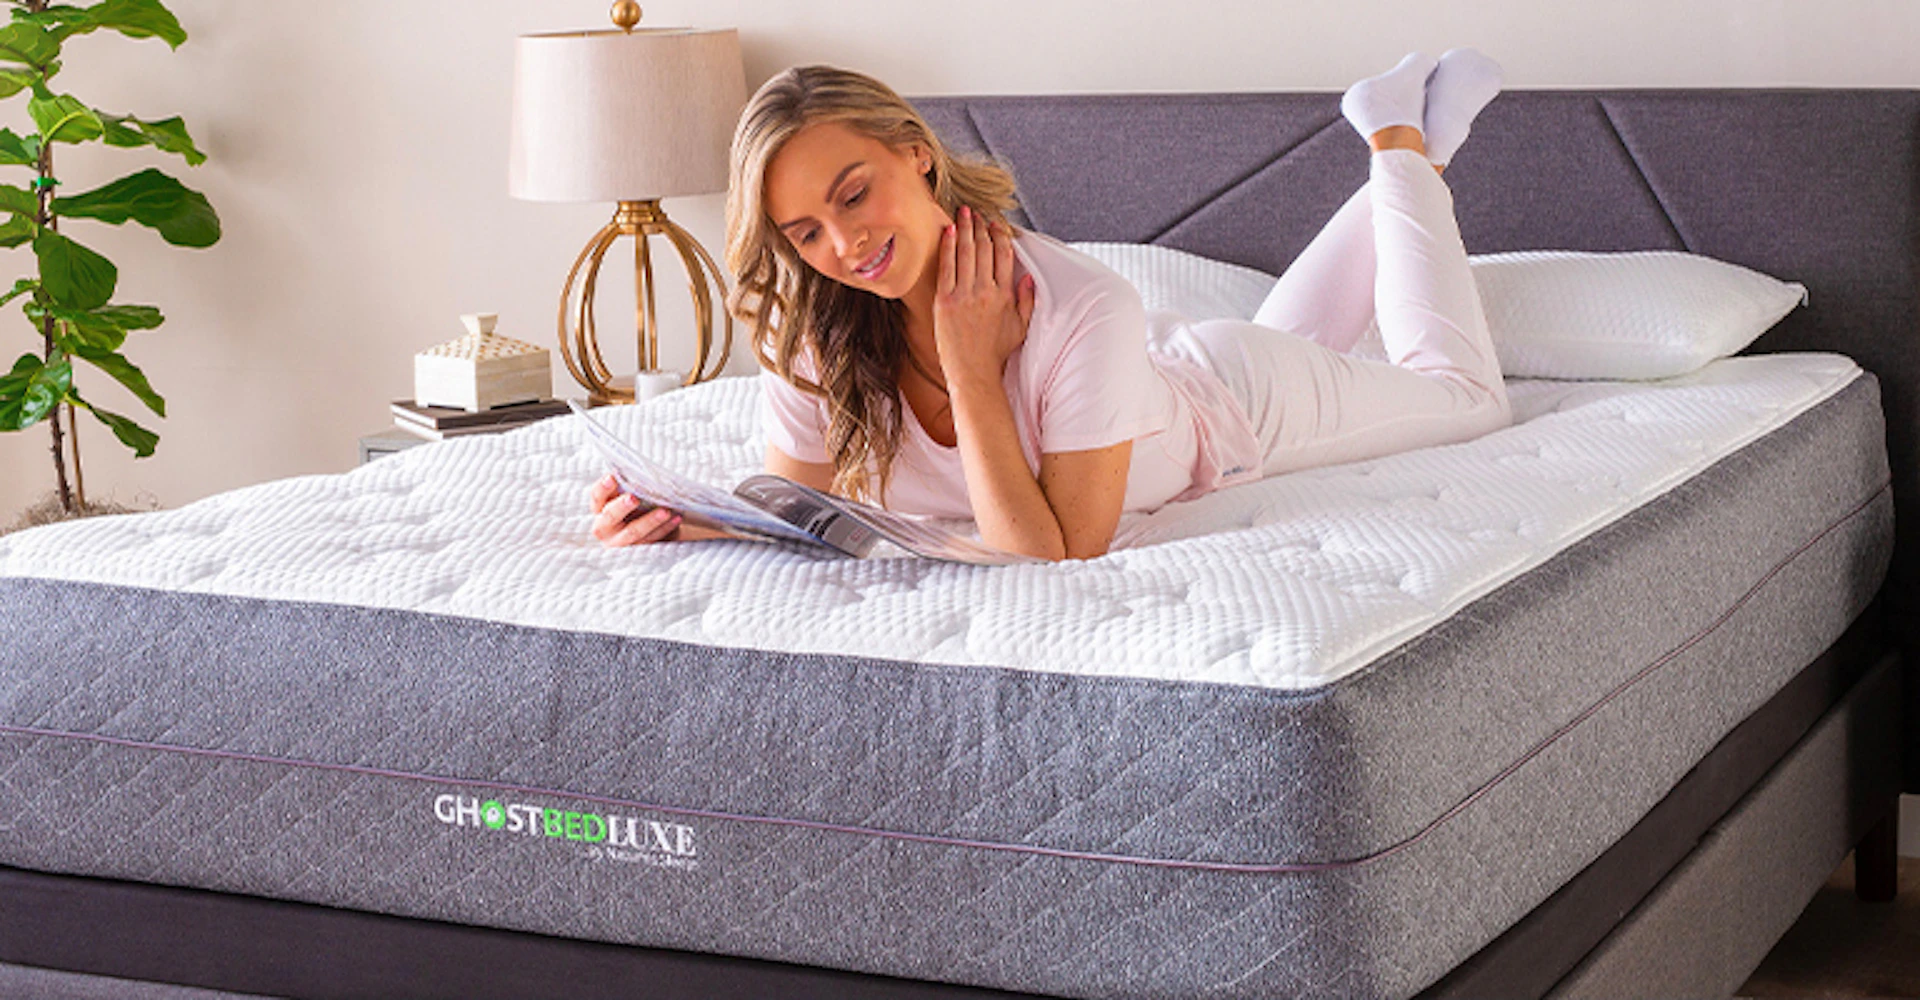 Buy Cooling Mattress Online at Best Price Online- The Sleep Company